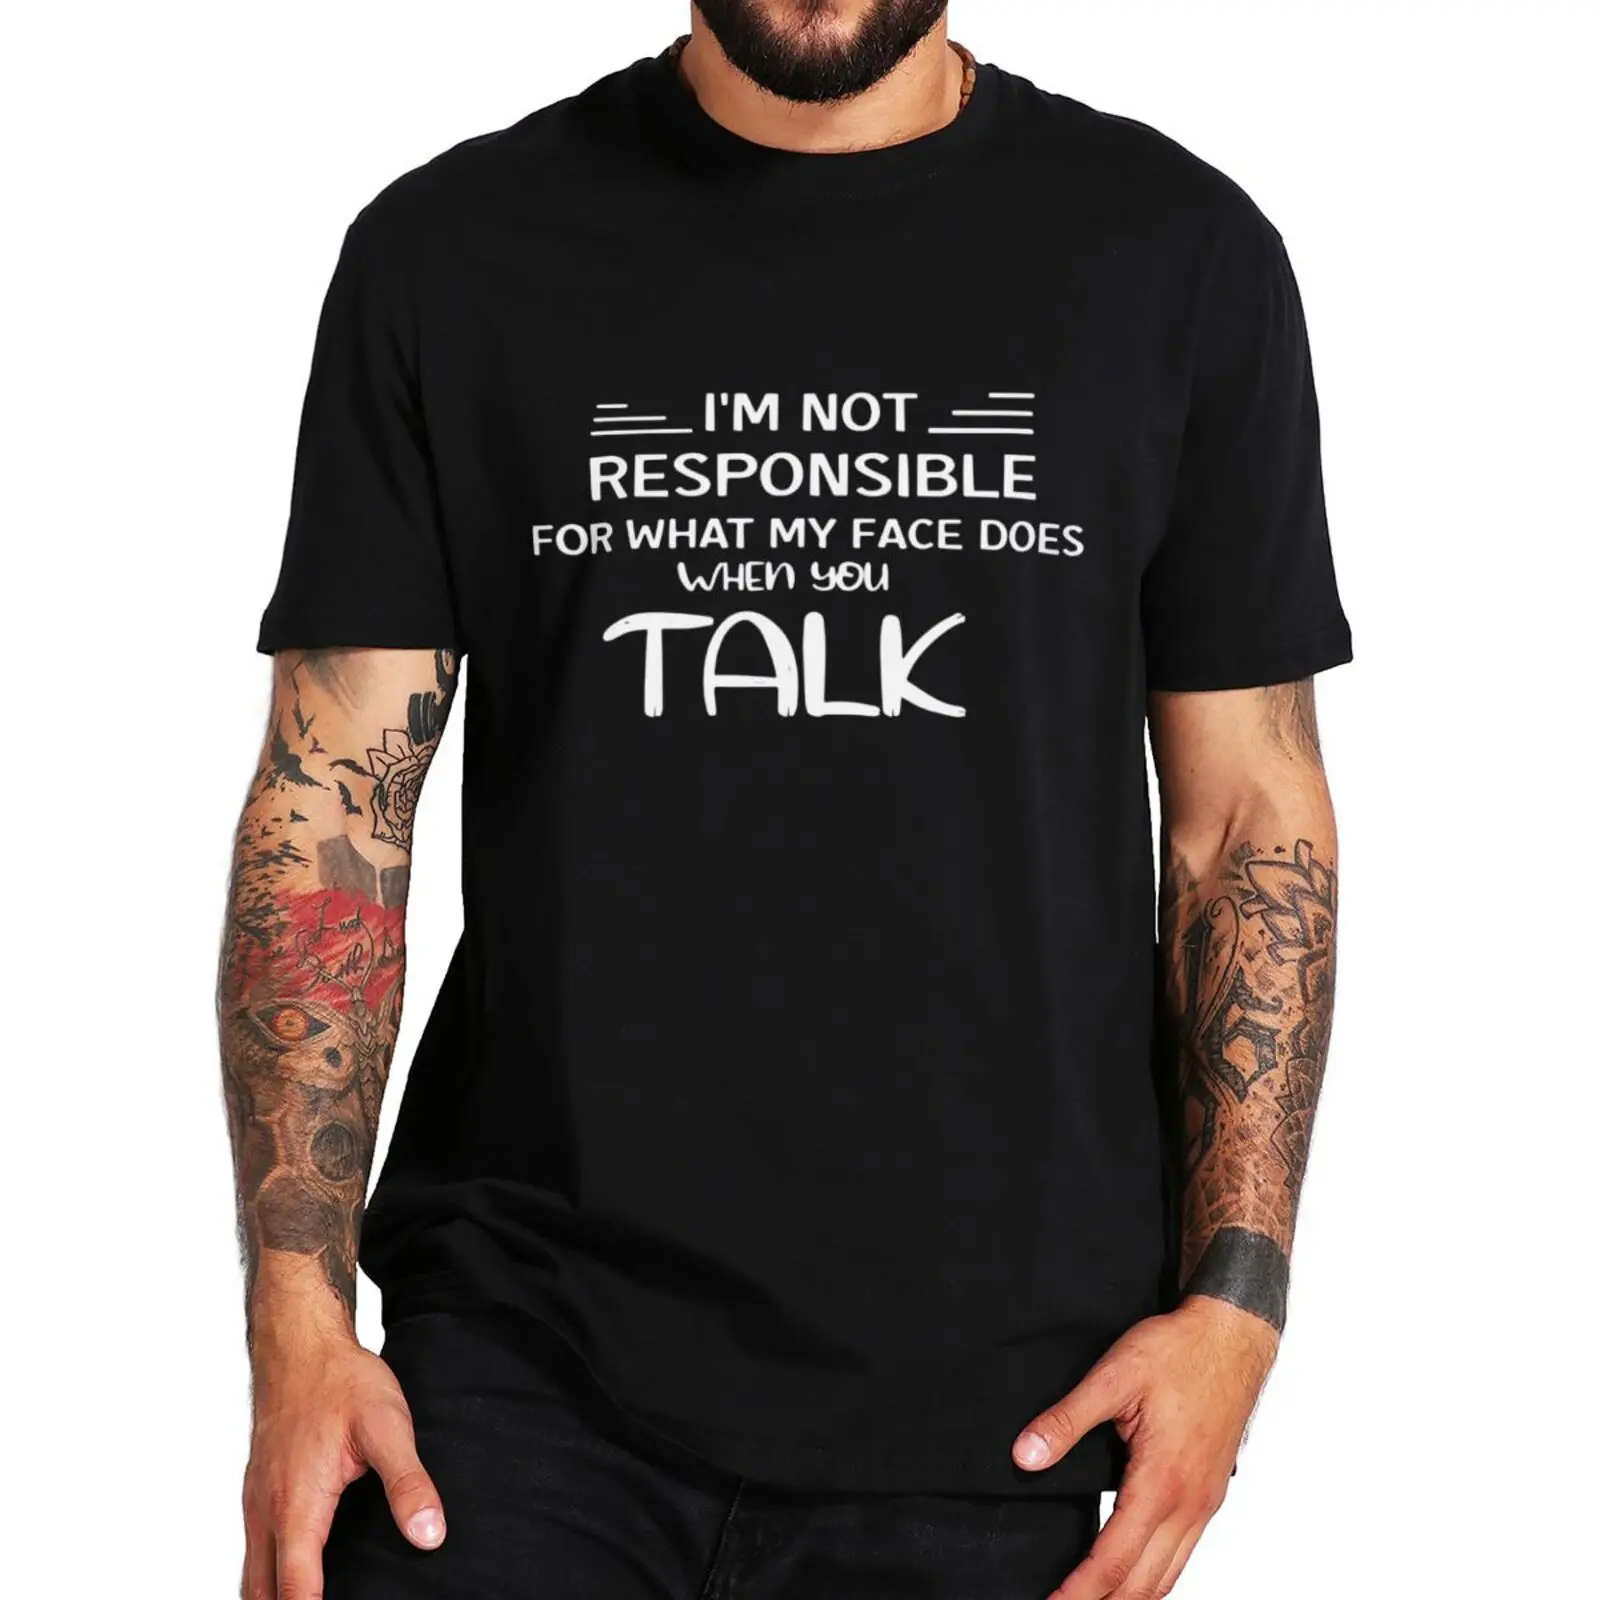 

I'm Not Responsible For What My Face Does When You Talk T Shirt Funny Jokes Humor Tee Tops Summer Casual 100% Cotton T-shirts